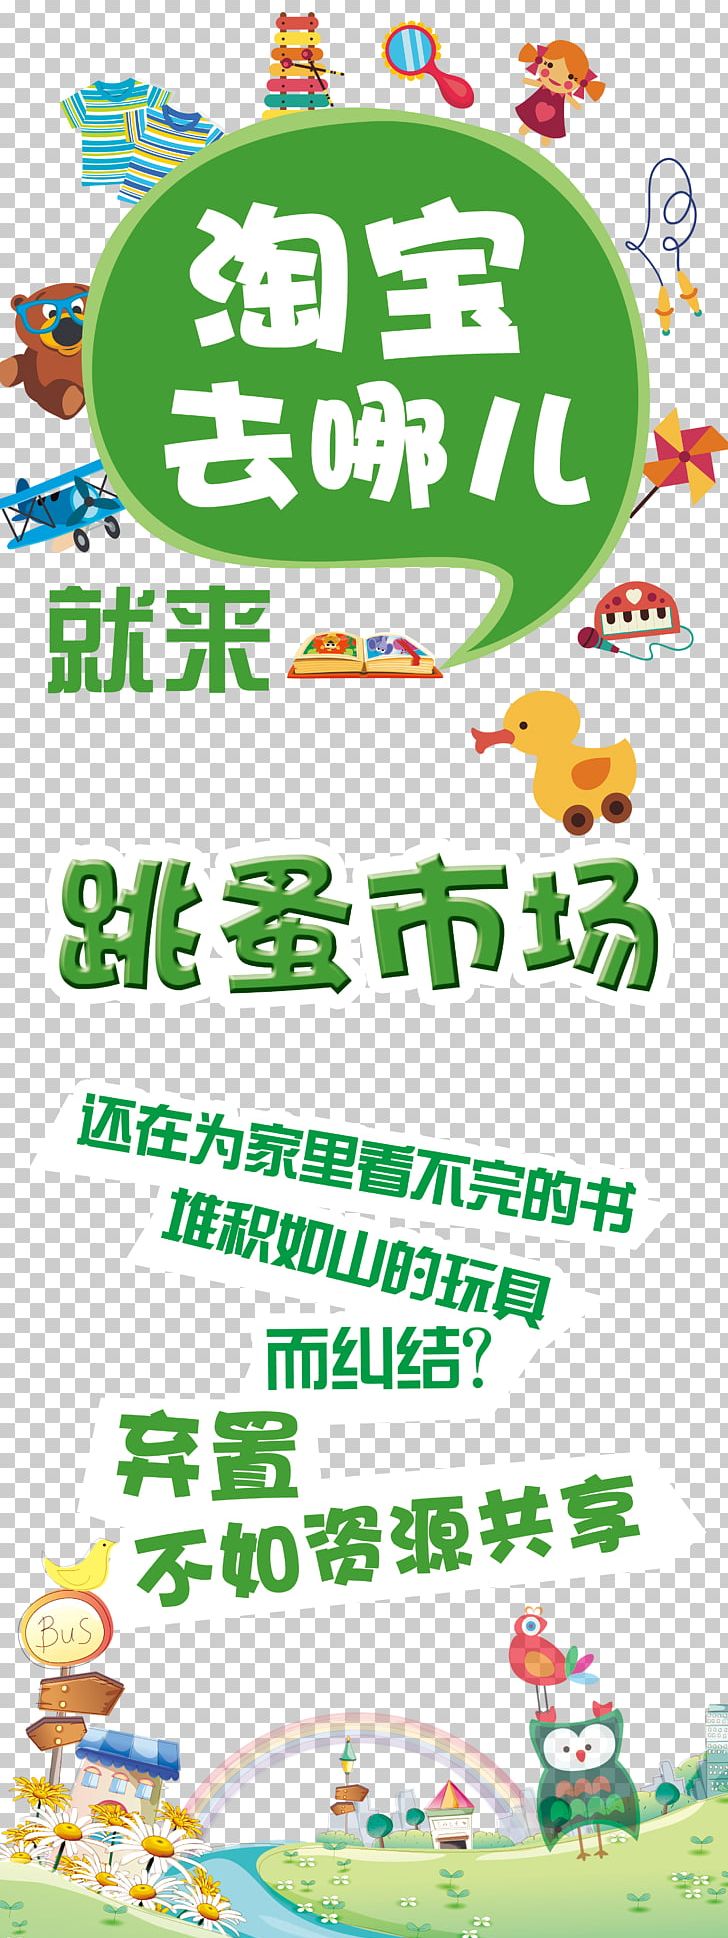 Flea Market Used Good Taobao PNG, Clipart, Cartoon, Childrens, Flea, Insects, Organism Free PNG Download